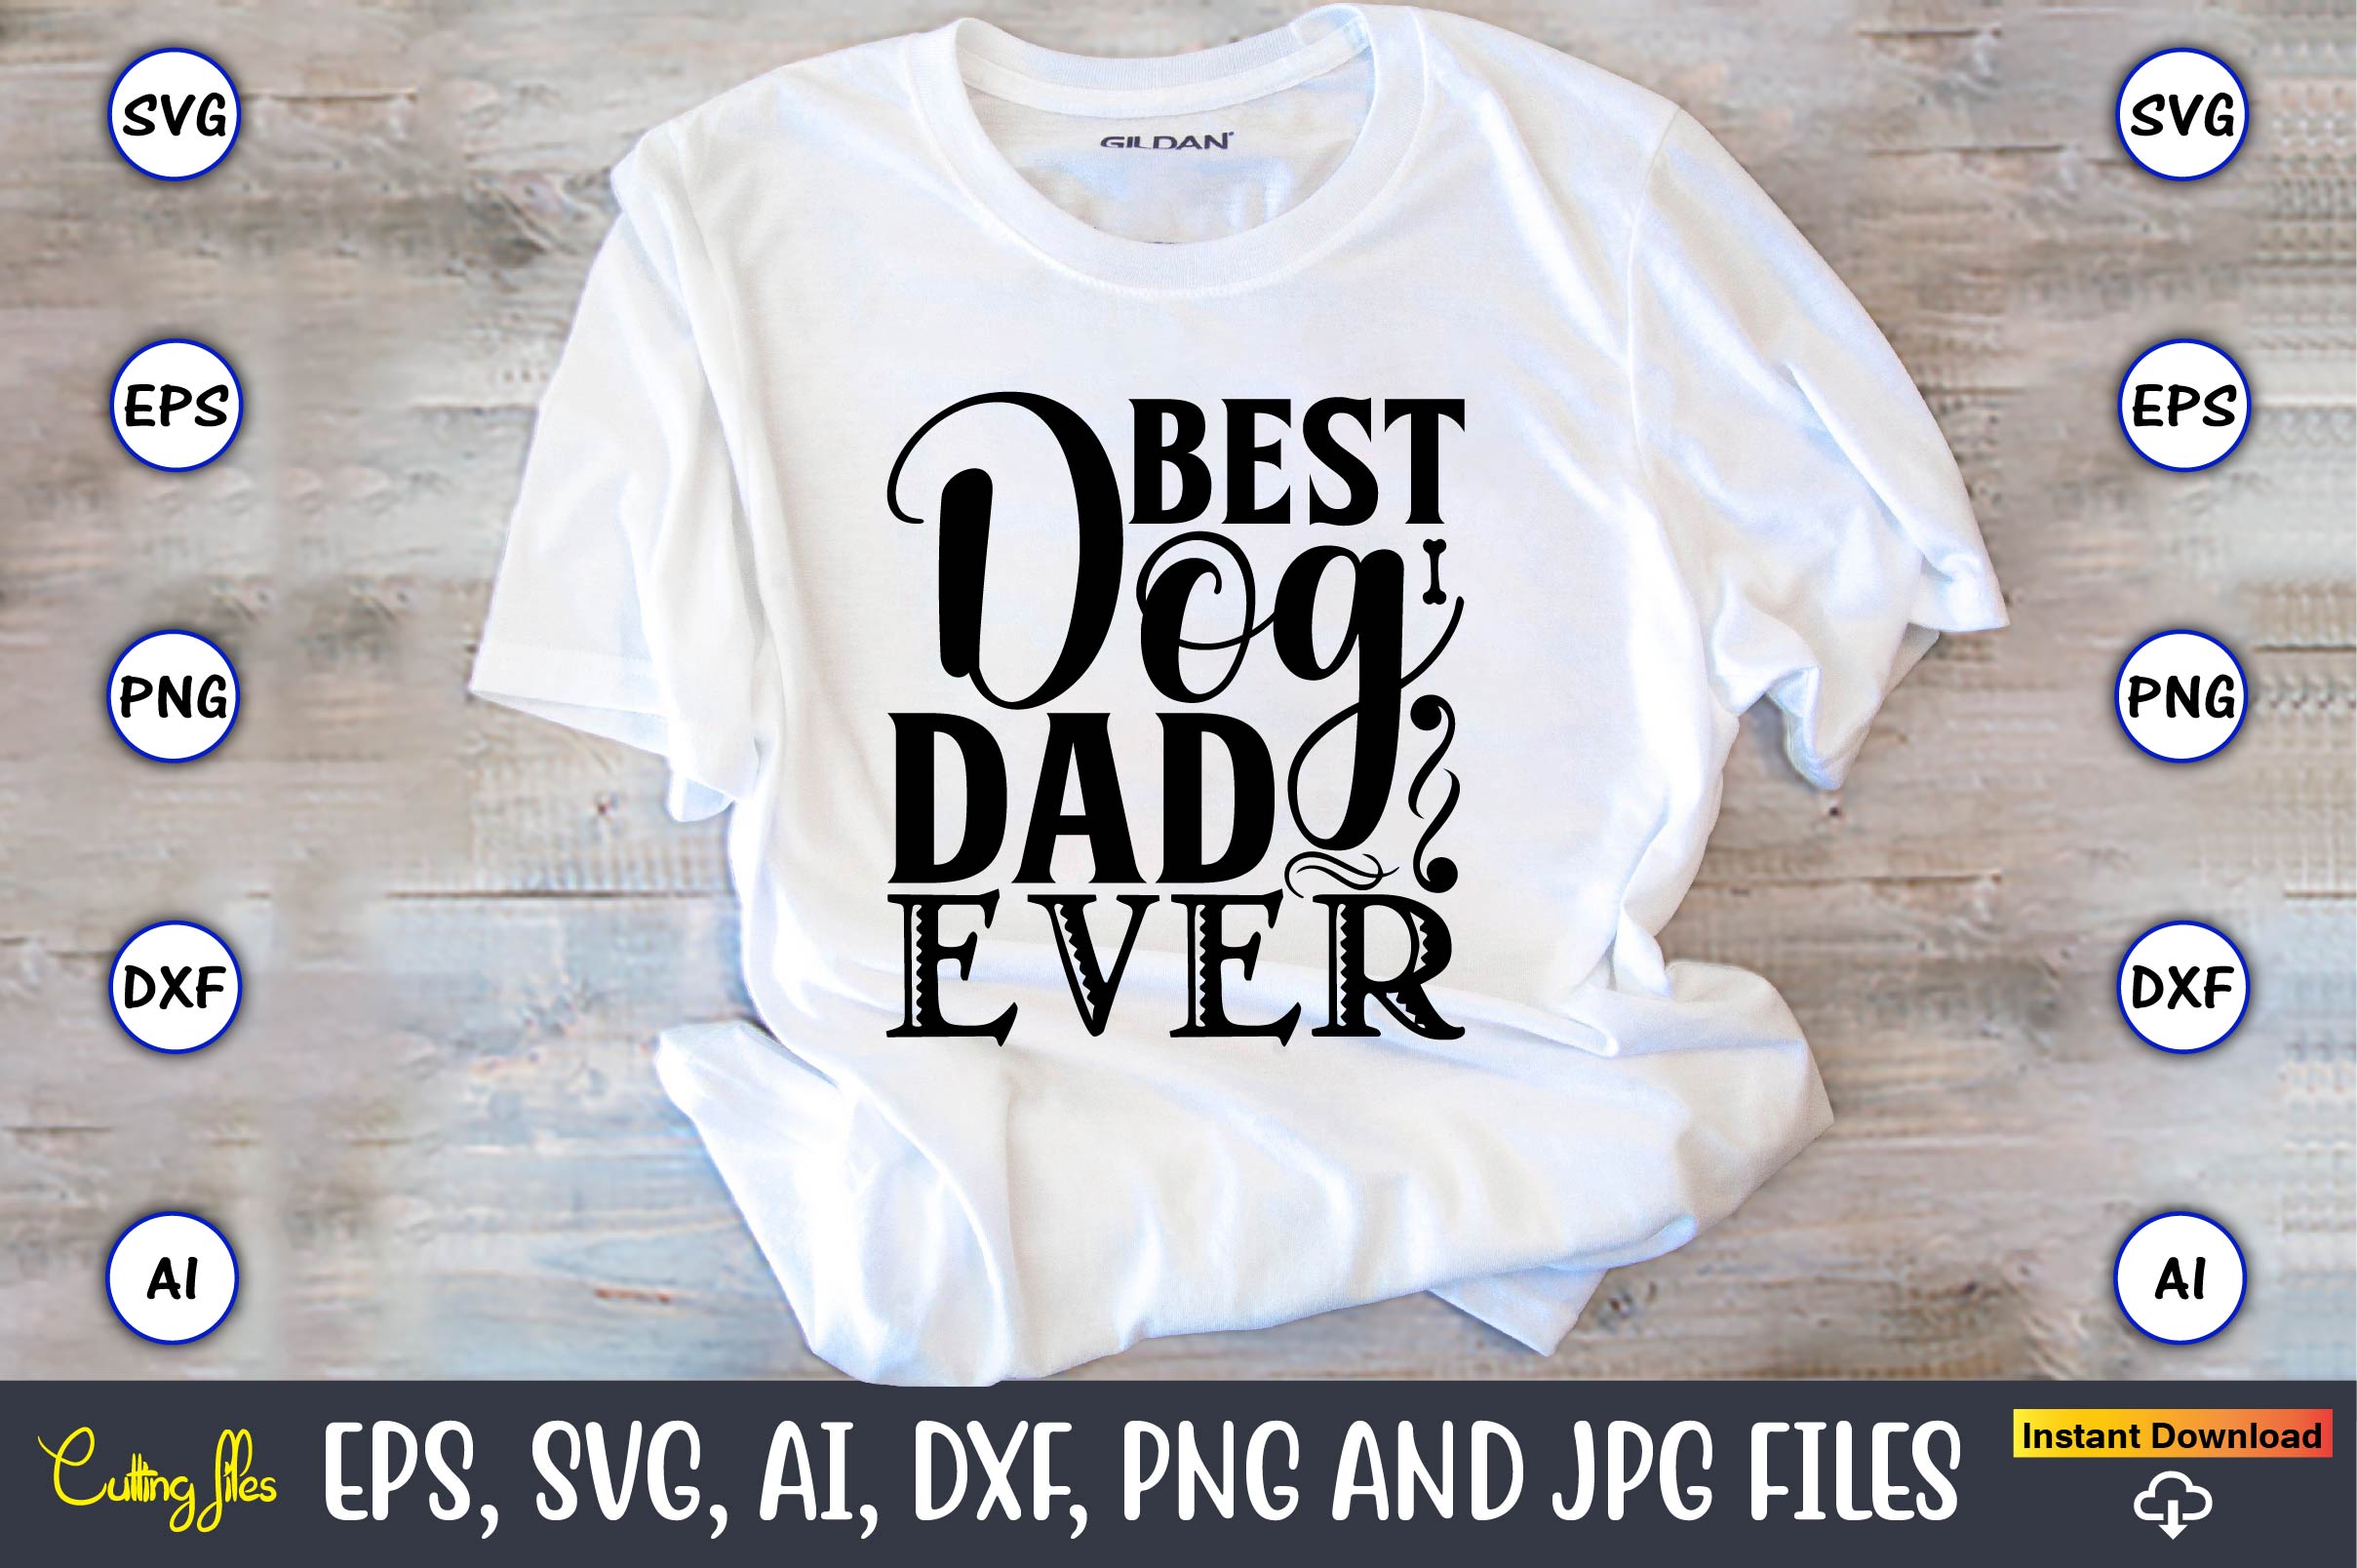 Image of a white t-shirt with a charming inscription Best dog dad ever.